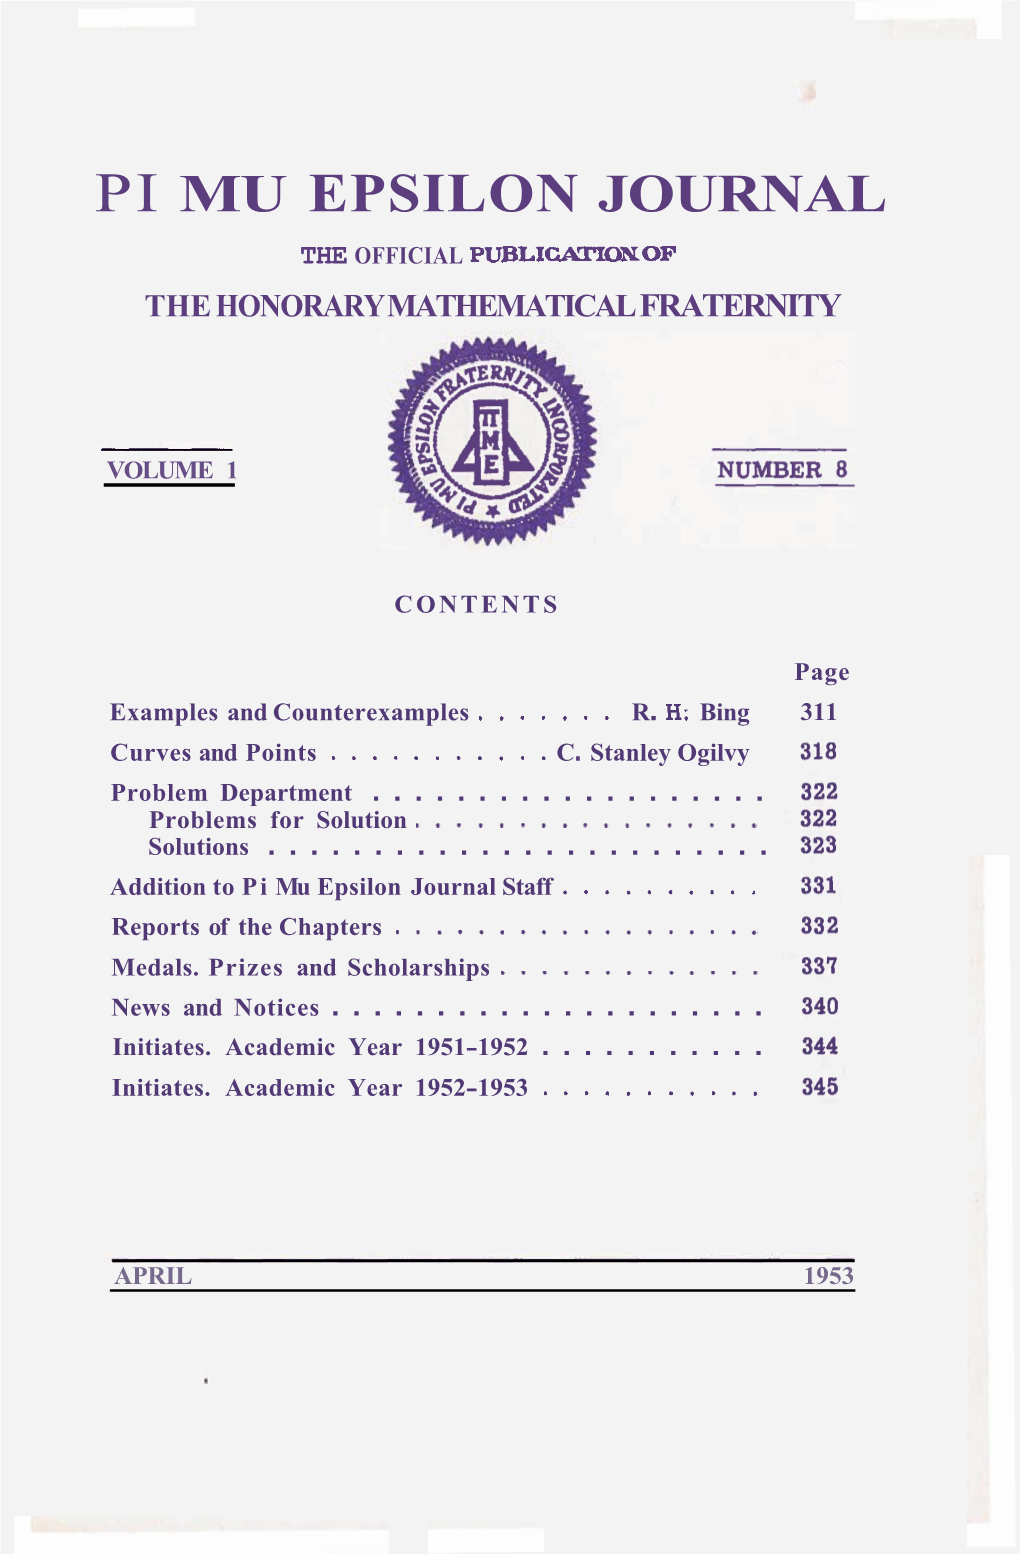 PI MU EPSILON JOURNAL the OFFICIAL Publicamokof the HONORARY MATHEMATICAL FRATERNITY